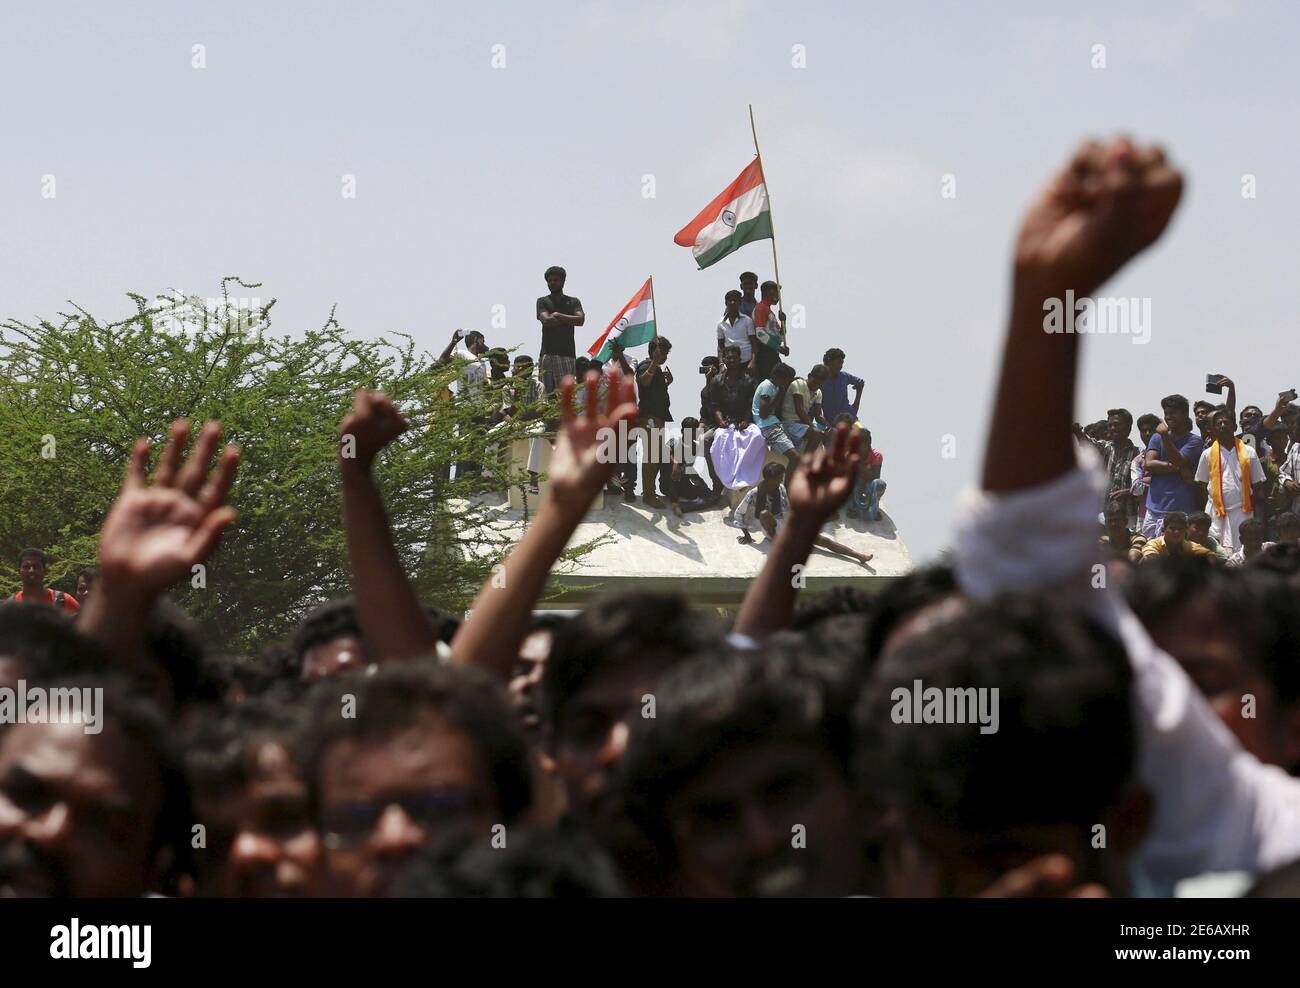 People shout slogans as they attend the funeral ceremony of former Indian President A.P.J. Abdul Kalam in Rameswaram, India, July 30, 2015. Kalam, considered the father of the country's missile programme, died on Monday in hospital at the age of 83, a doctor said. Popularly known as 'Missile Man,' Kalam led the scientific team that developed missiles able to carry India's nuclear warheads. He became a national folk hero after helping oversee nuclear tests in 1998 that solidified India's status as a nuclear weapons state. REUTERS/Danish Siddiqui Stock Photo